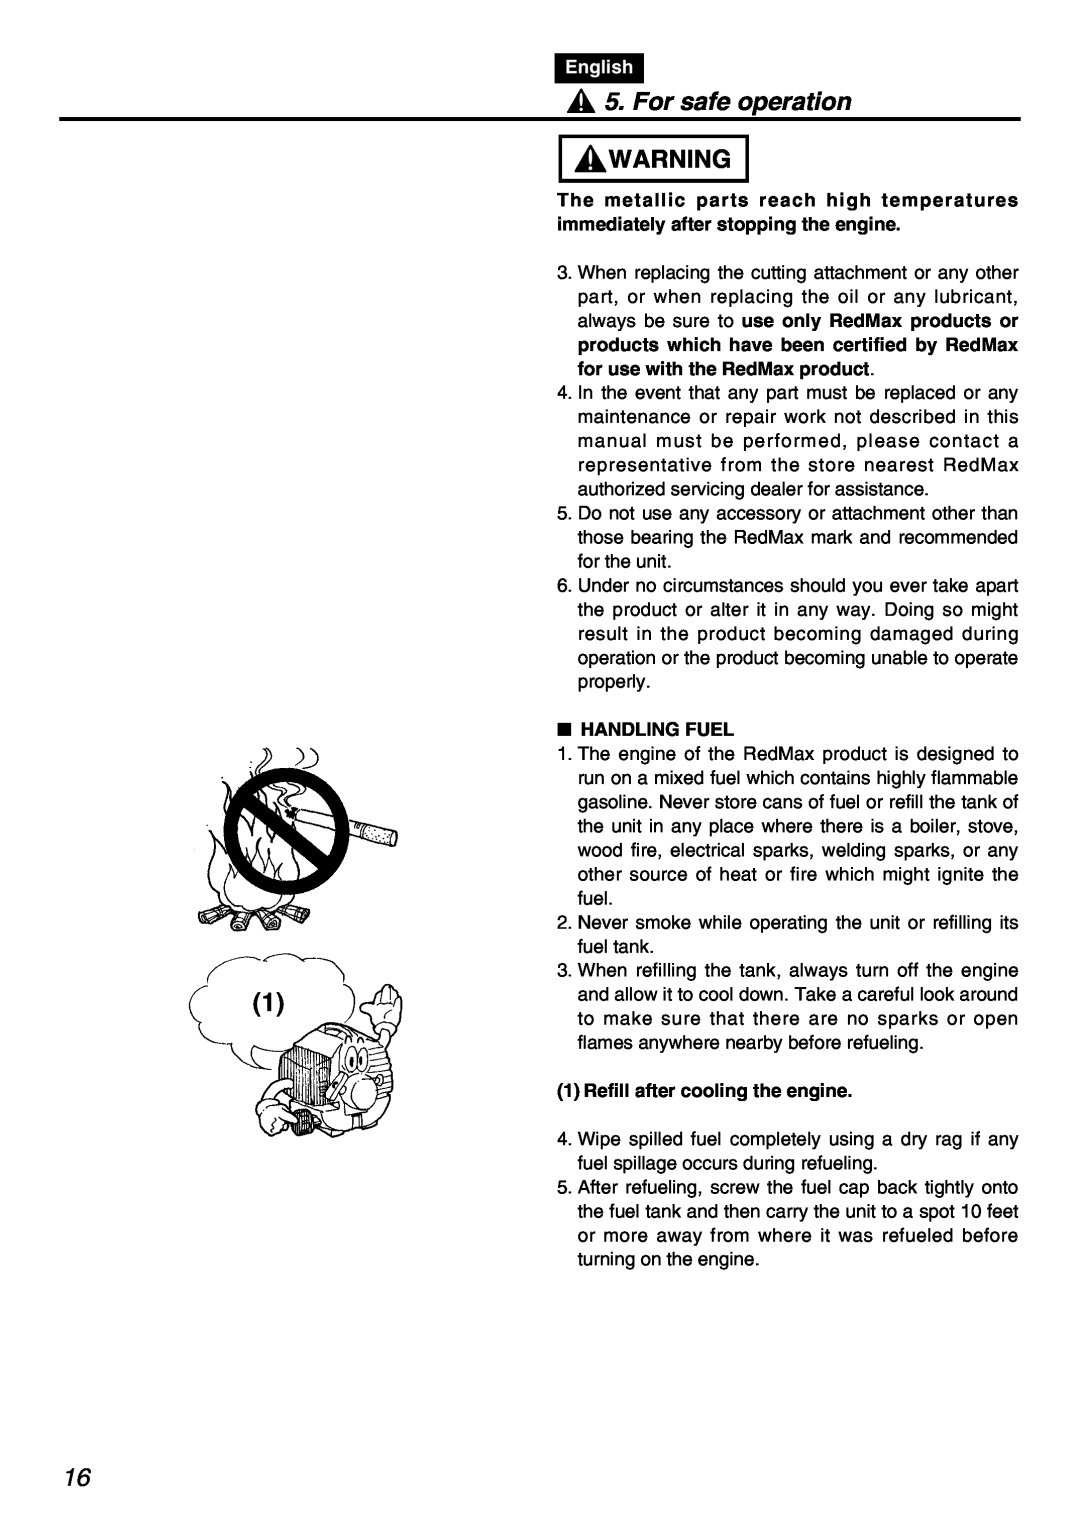 Zenoah PSZ2401 manual For safe operation, English, Handling Fuel, Refill after cooling the engine 